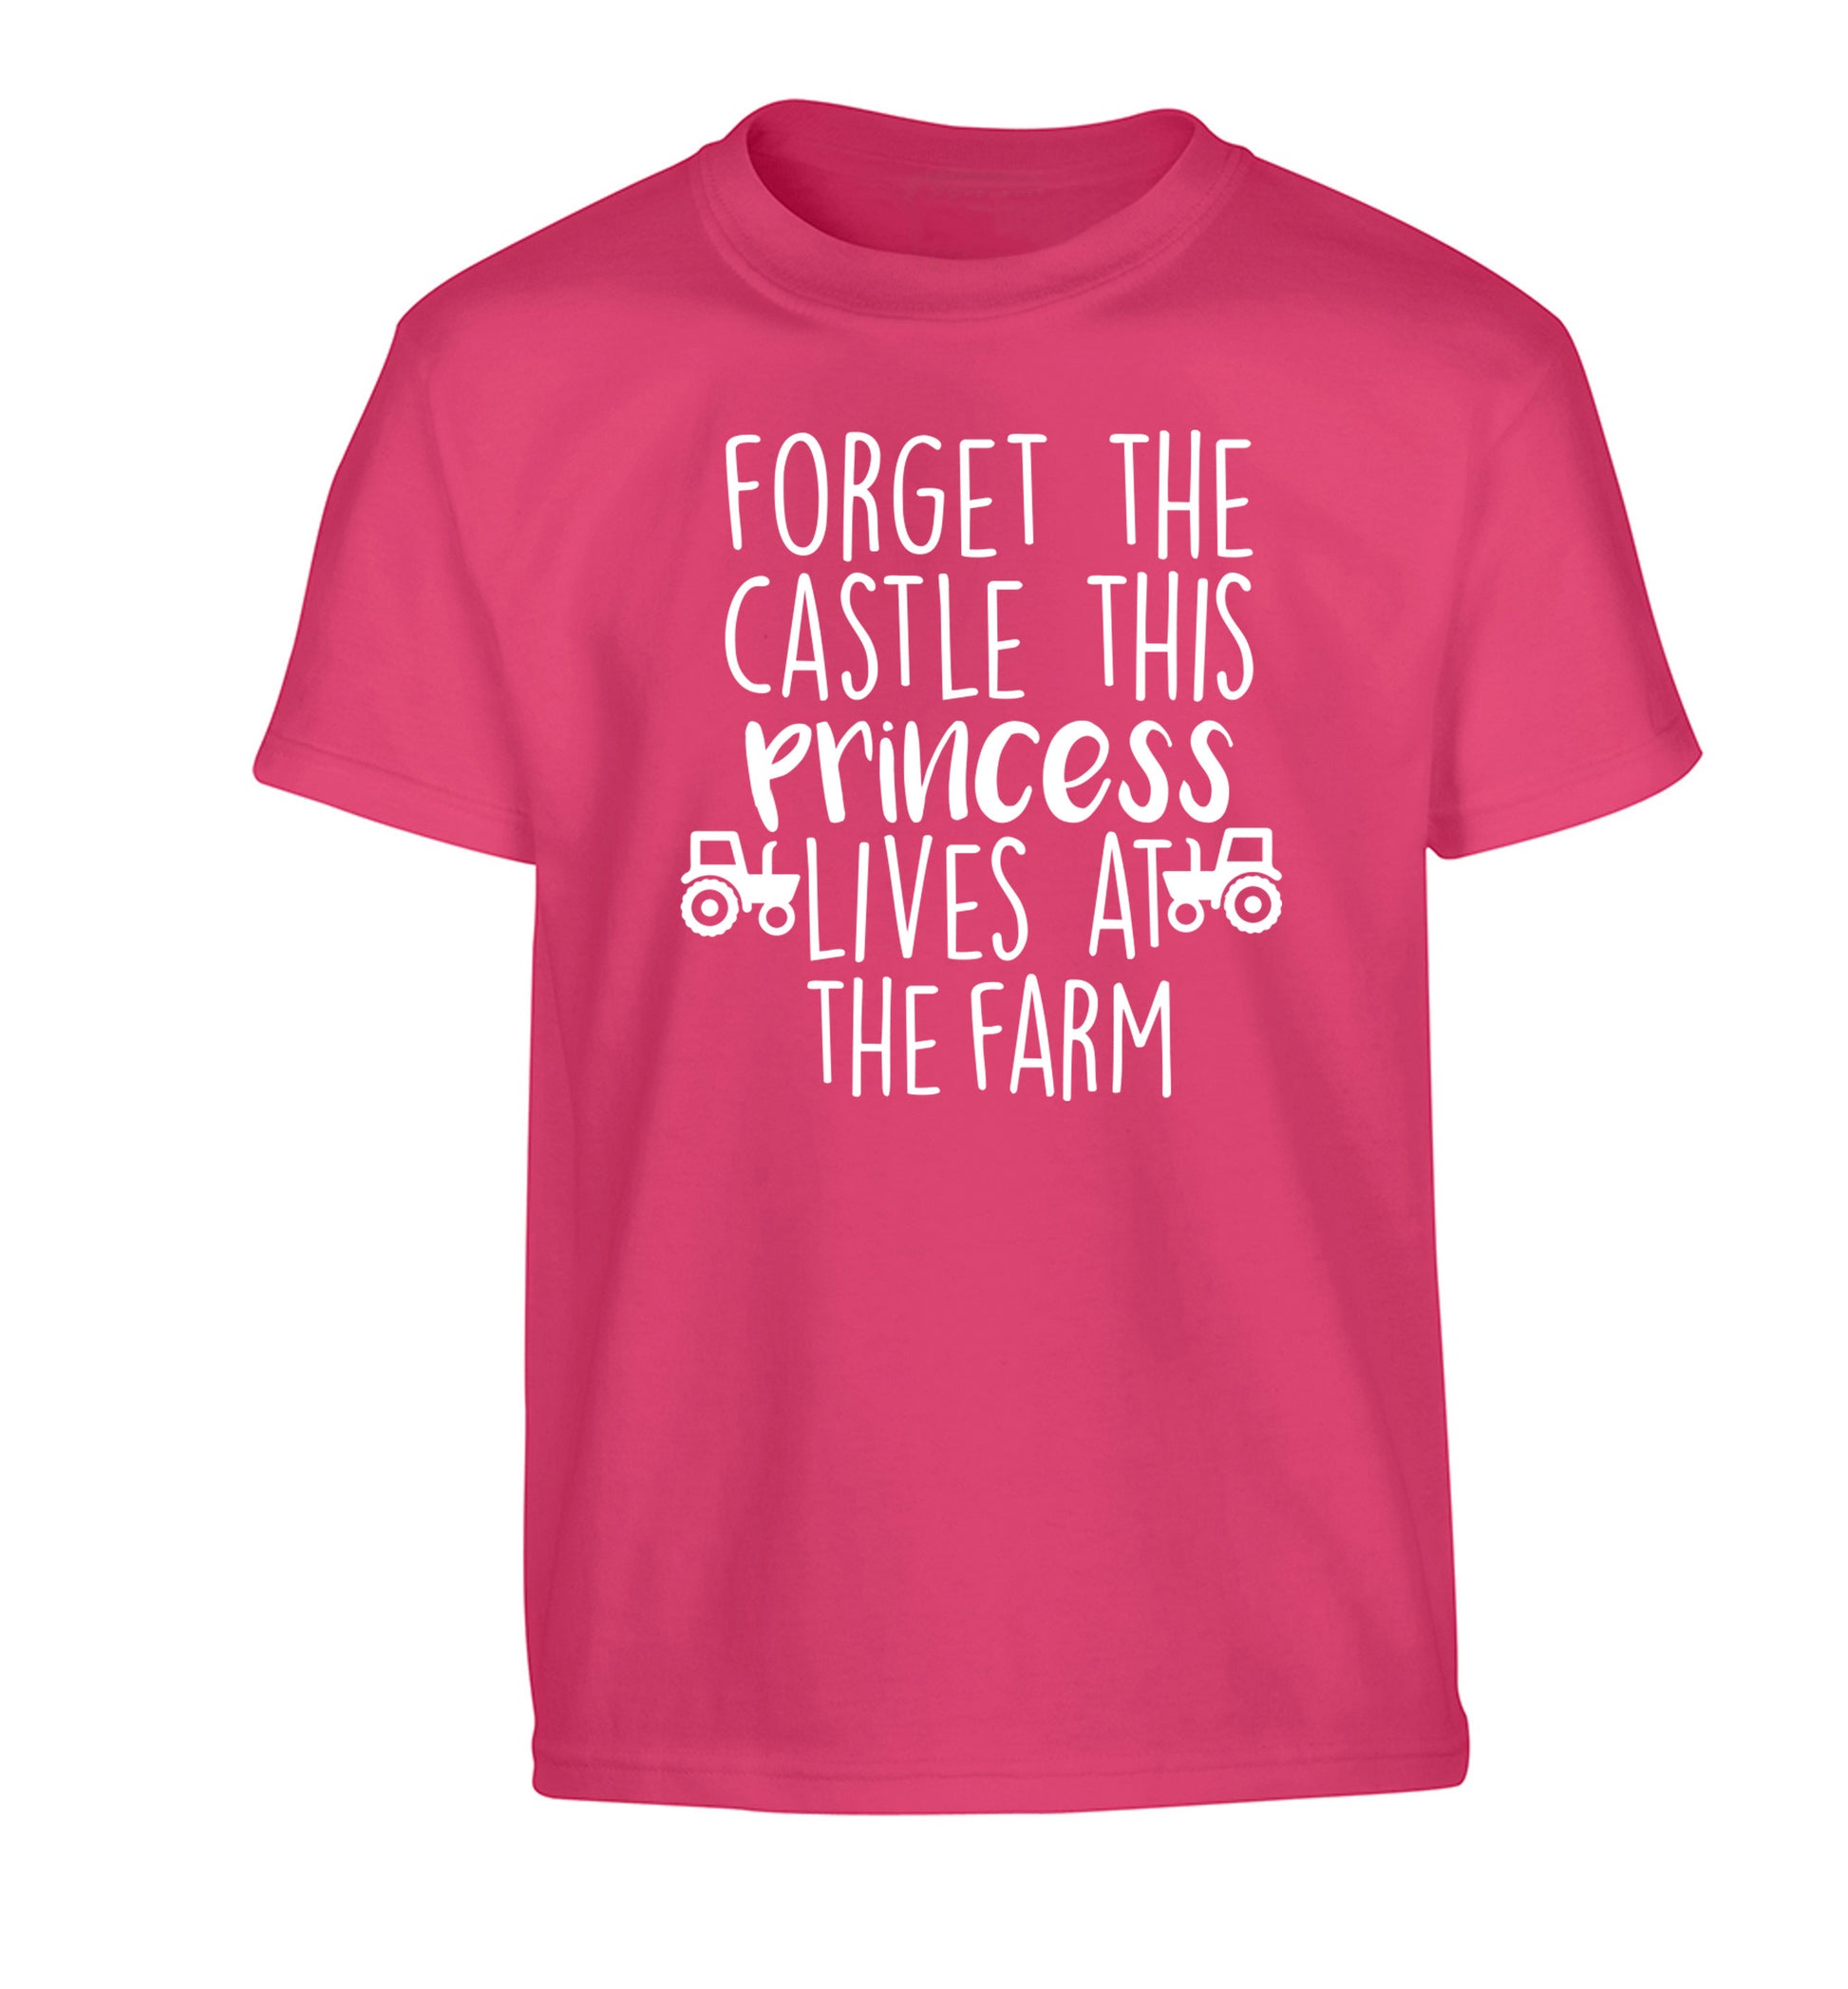 Forget the castle this princess lives at the farm Children's pink Tshirt 12-14 Years